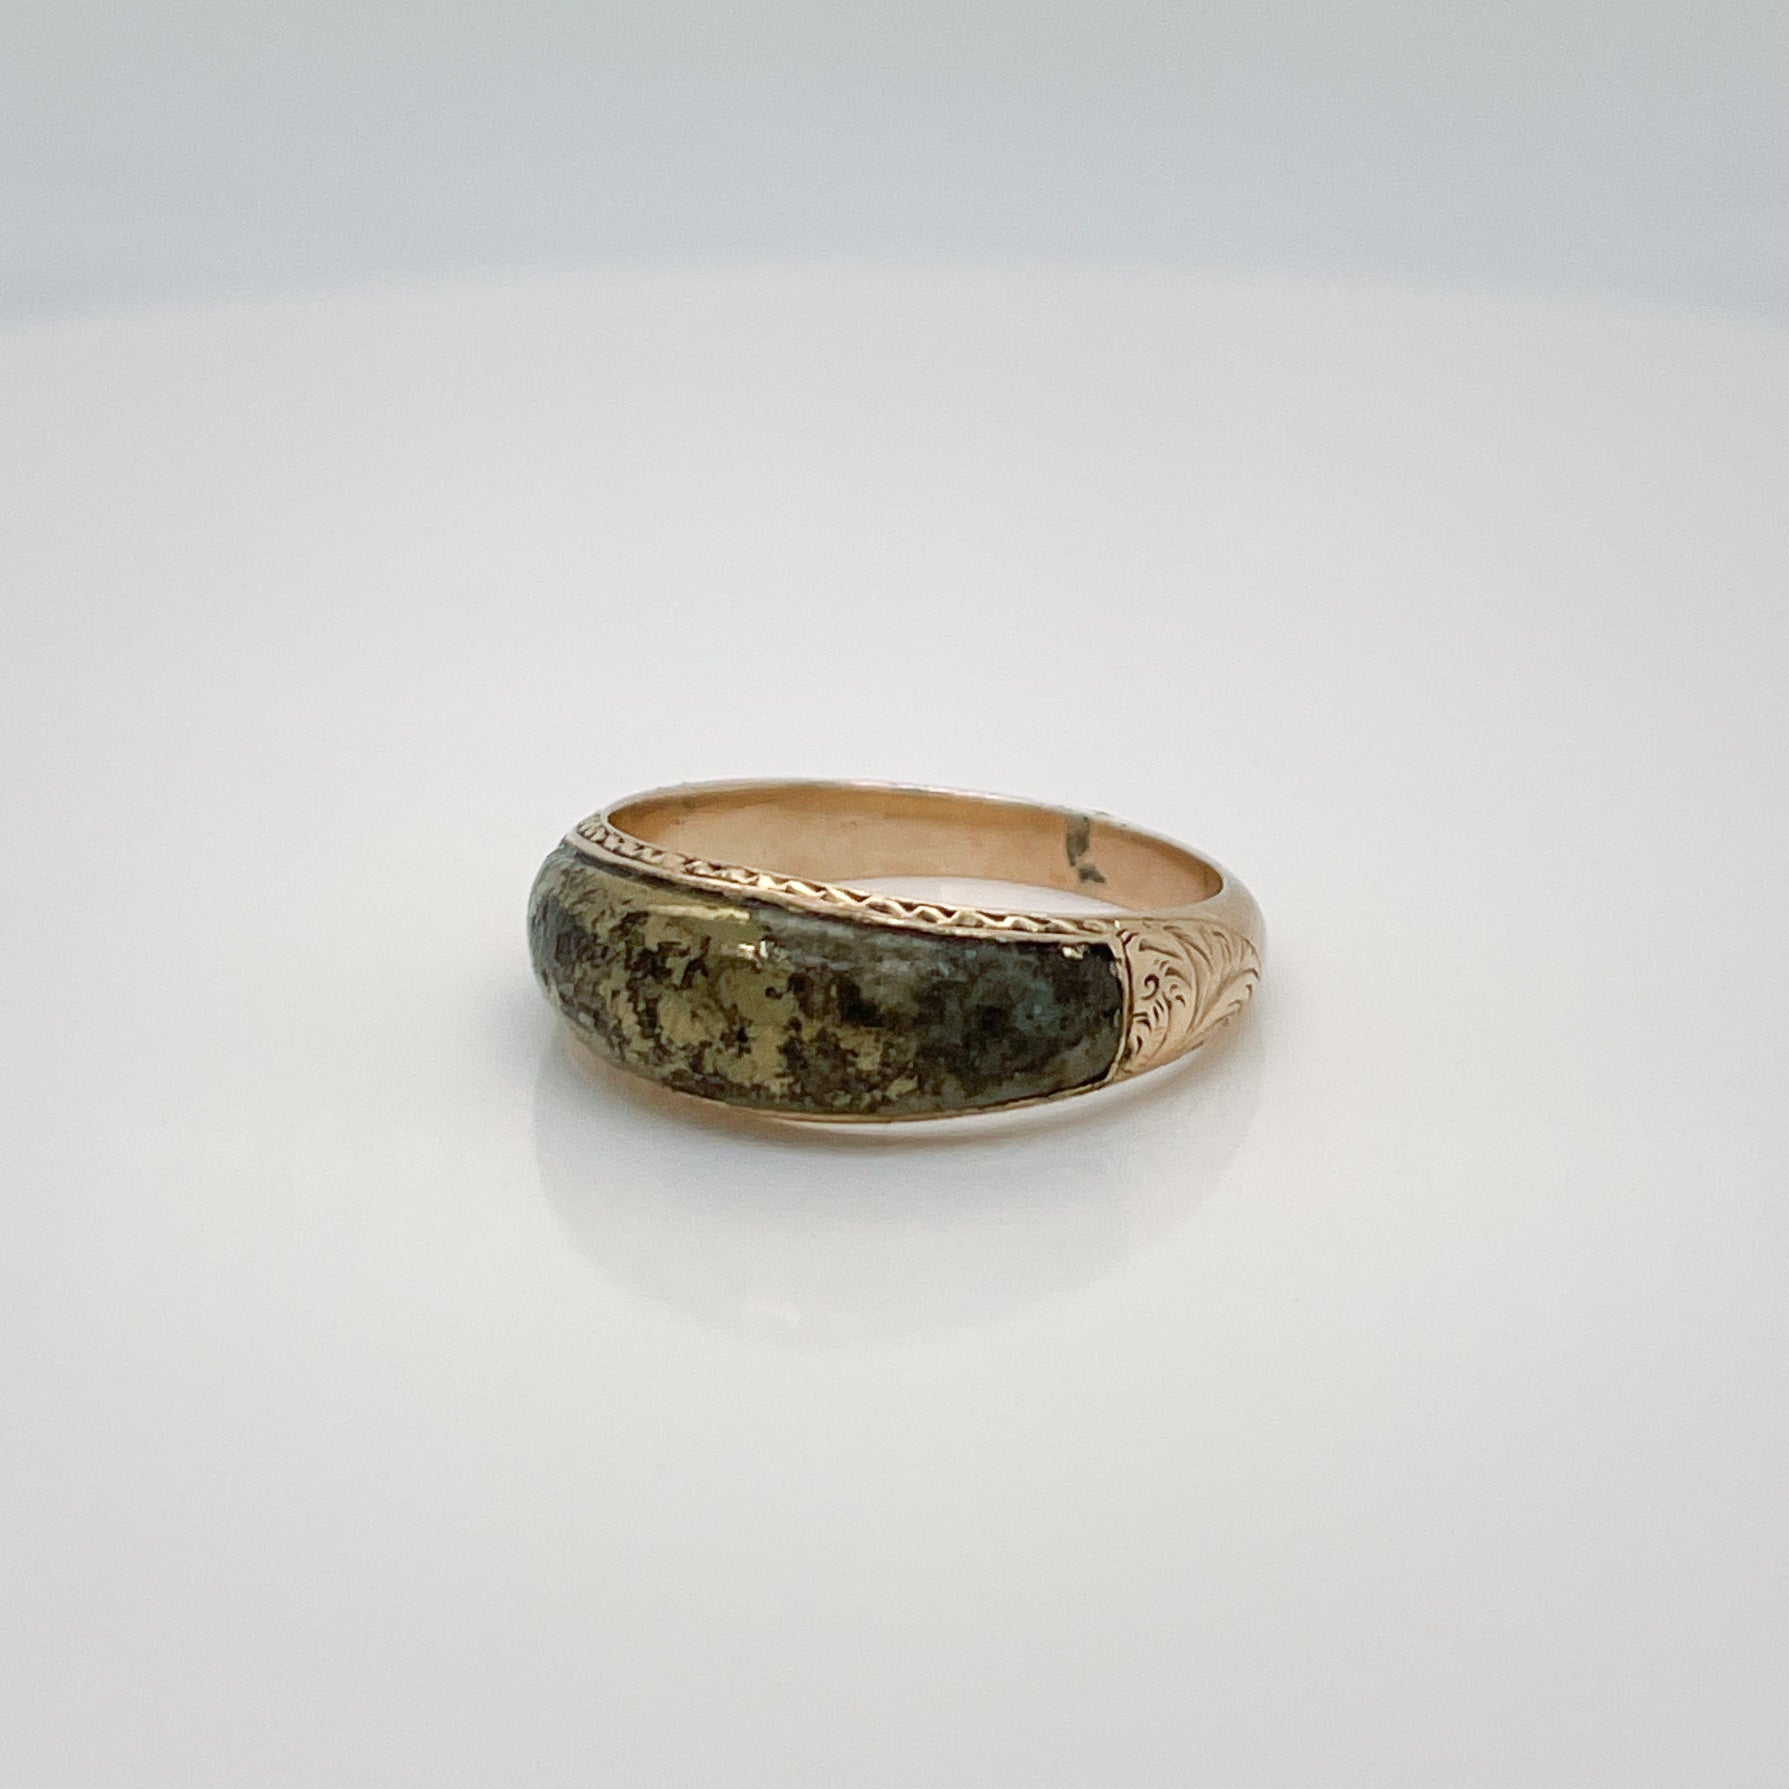 A fine antique Victorian ring.

In 14 karat yellow gold.

Inlaid with a polished, shaped pyrite (or gold quartz) cabochon and decorated with etched and engraved decoration to the sides & shoulders.

Simply a lovely pyrite specimen ring!

Date:
19th